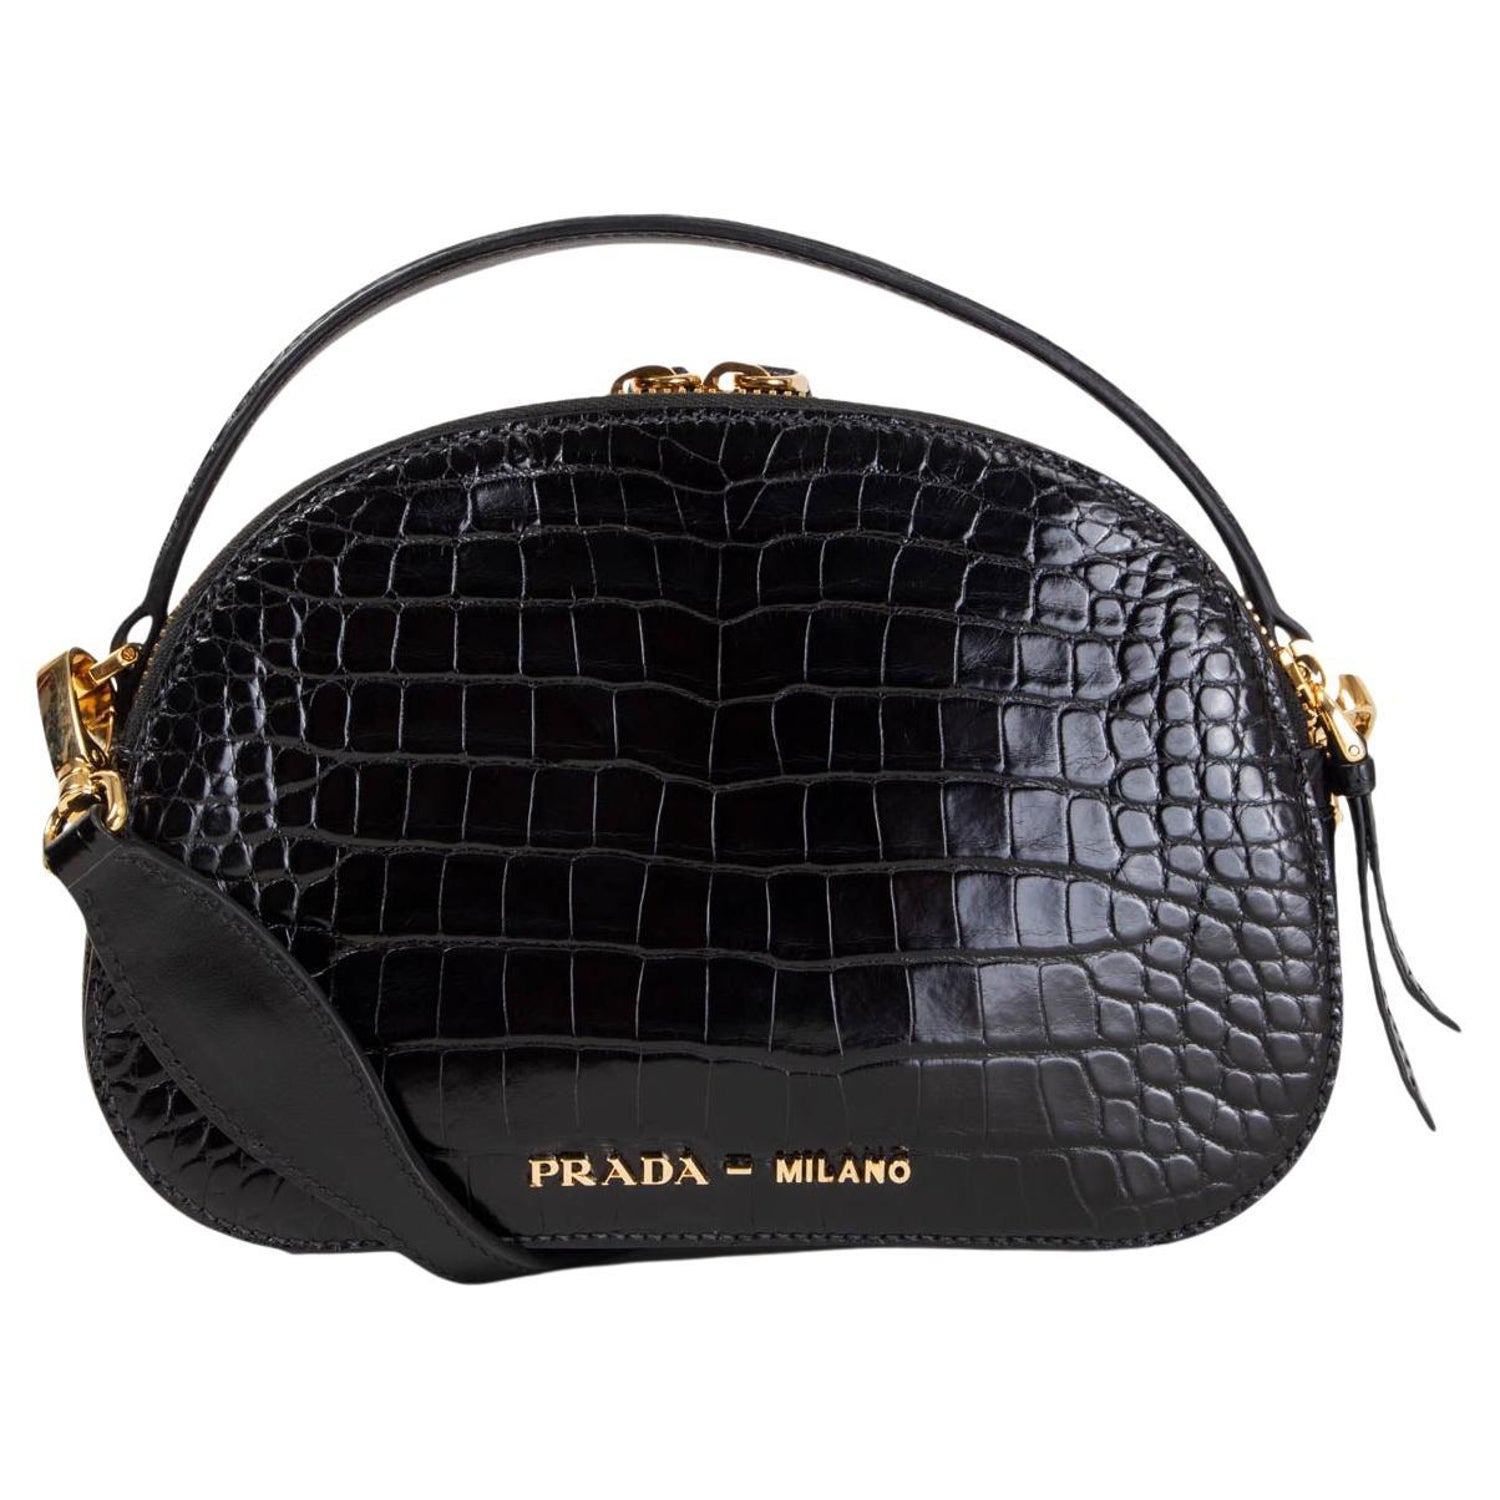 Prada Odette Heart Bag In Red Saffiano Leather – Bagsers